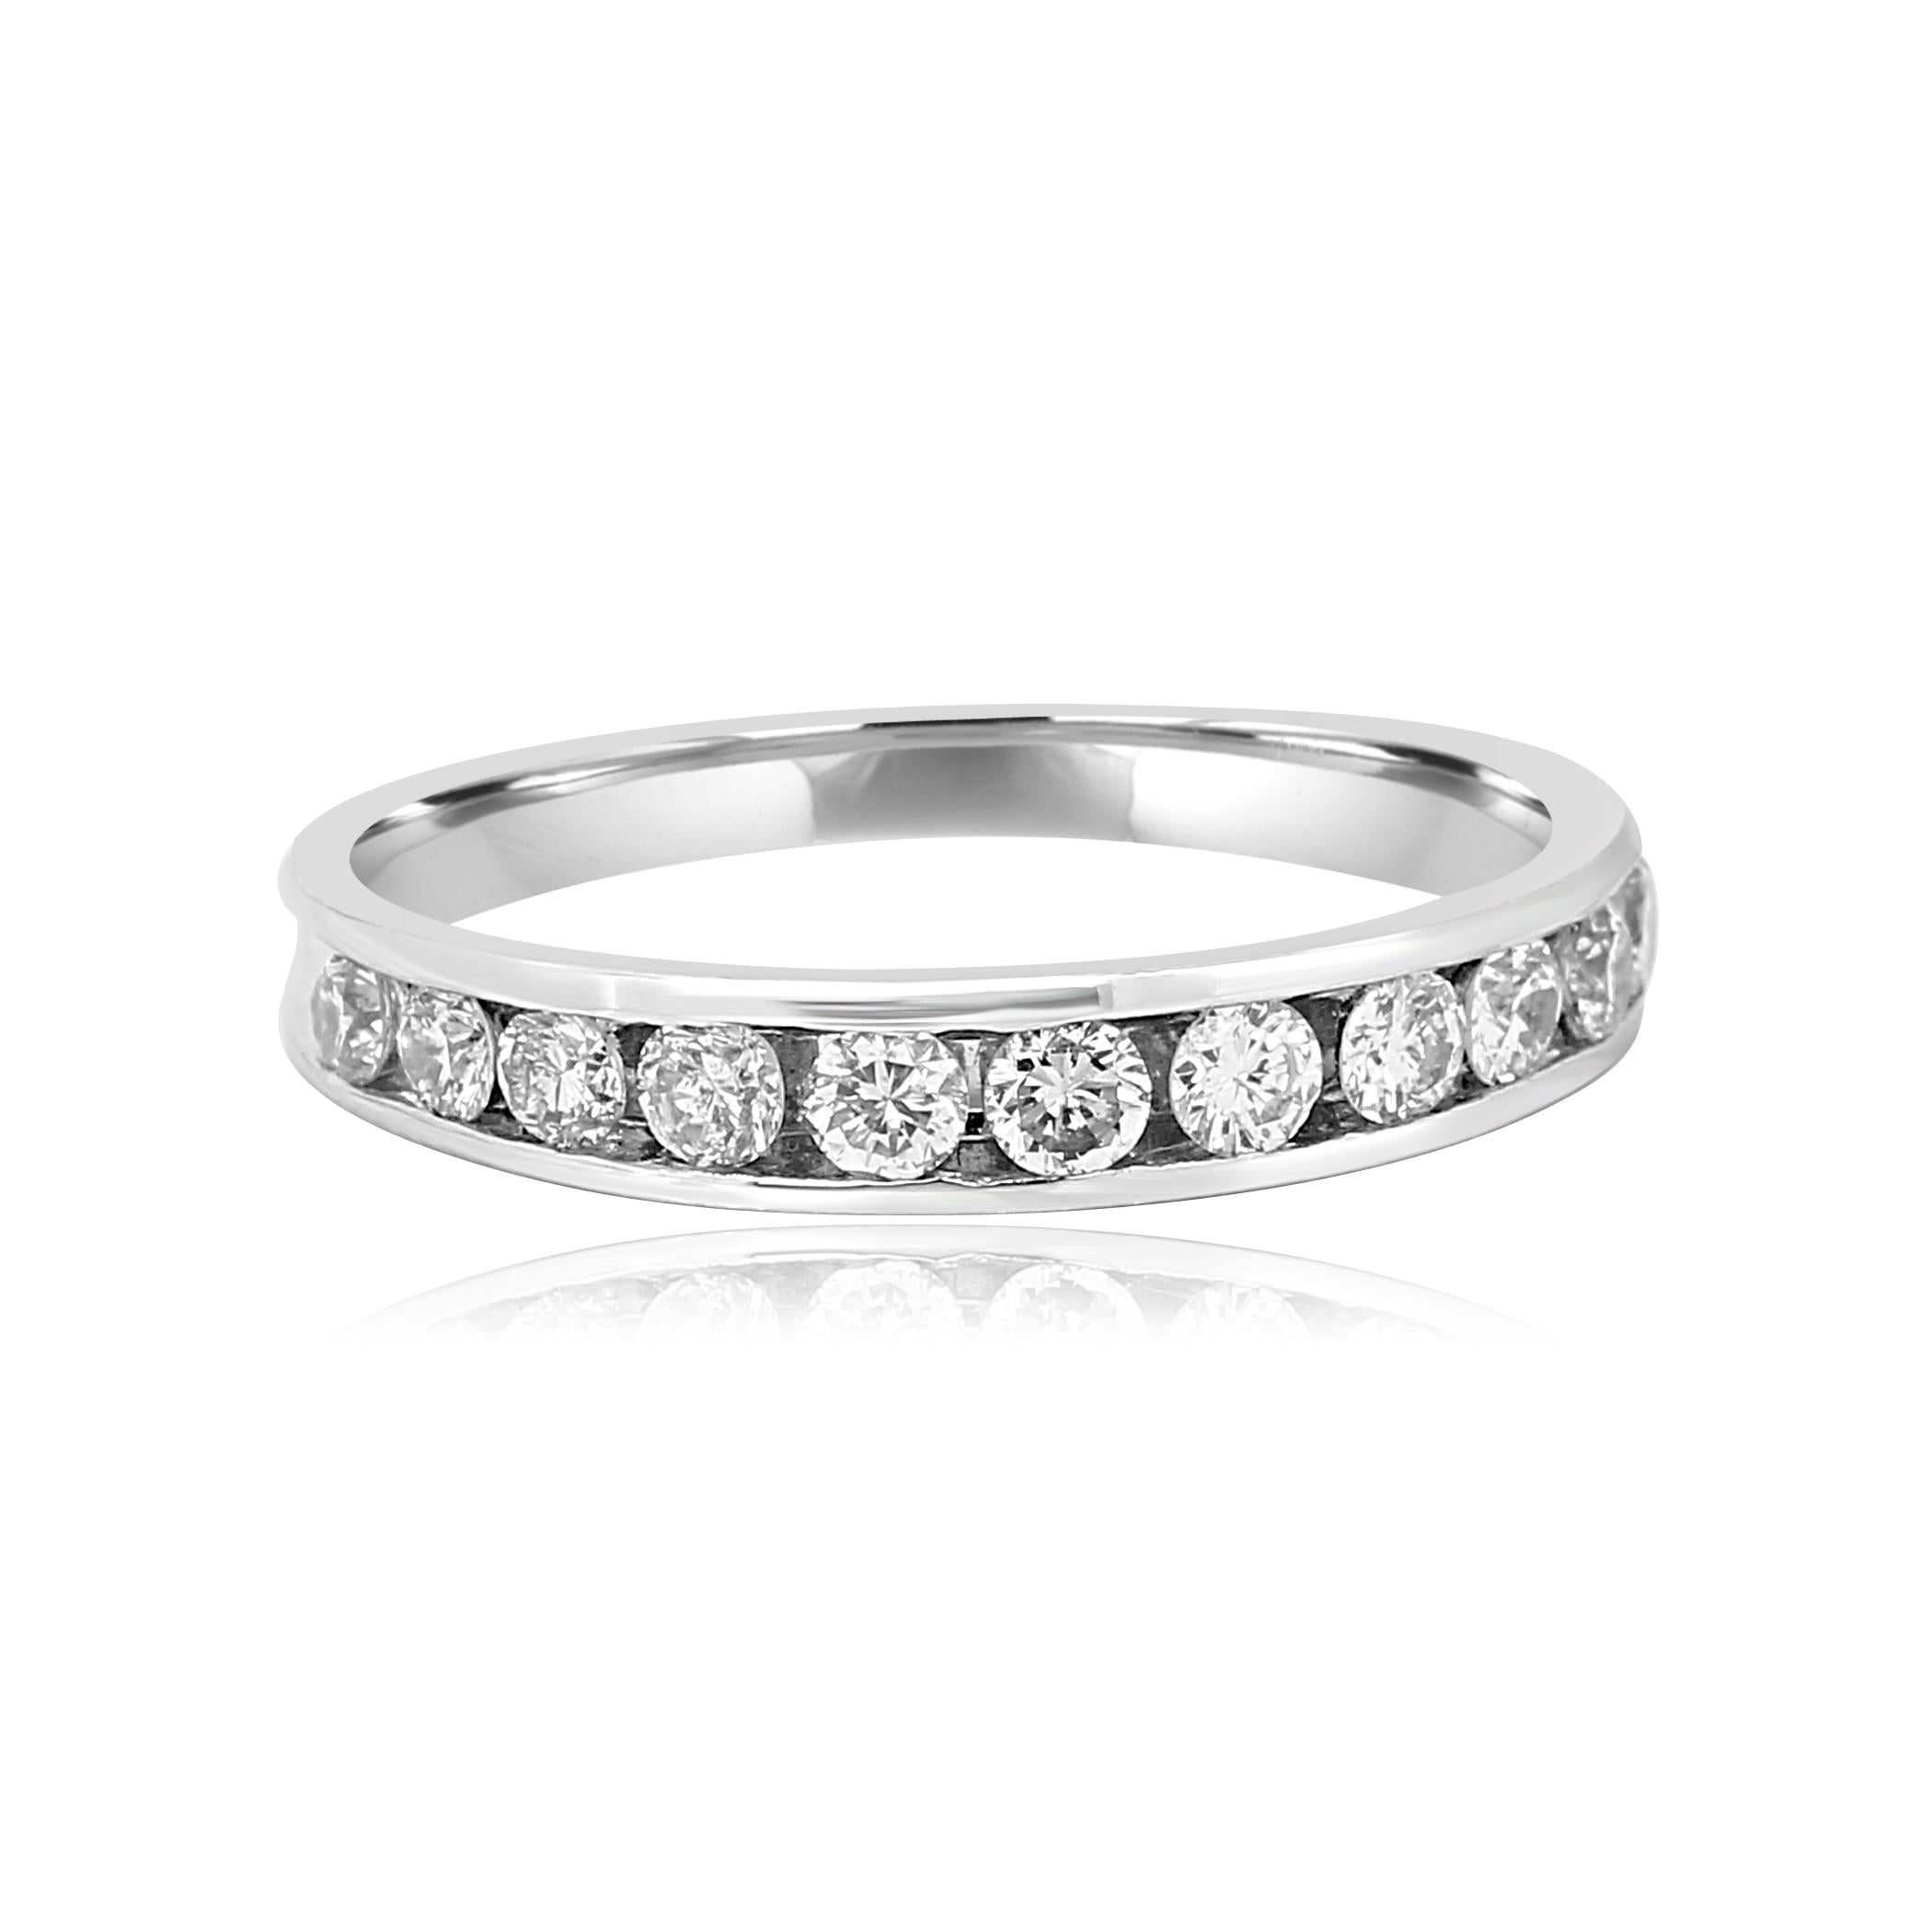 11 White G-H Color SI Diamond Round 0.50 Carat Channel Set in 14K White Gold Bridal Fashion Cocktail Band Ring.

Style available in different price ranges. Prices are based on your selection of 4C's i.e Cut, Color, Carat, Clarity. Please contact us